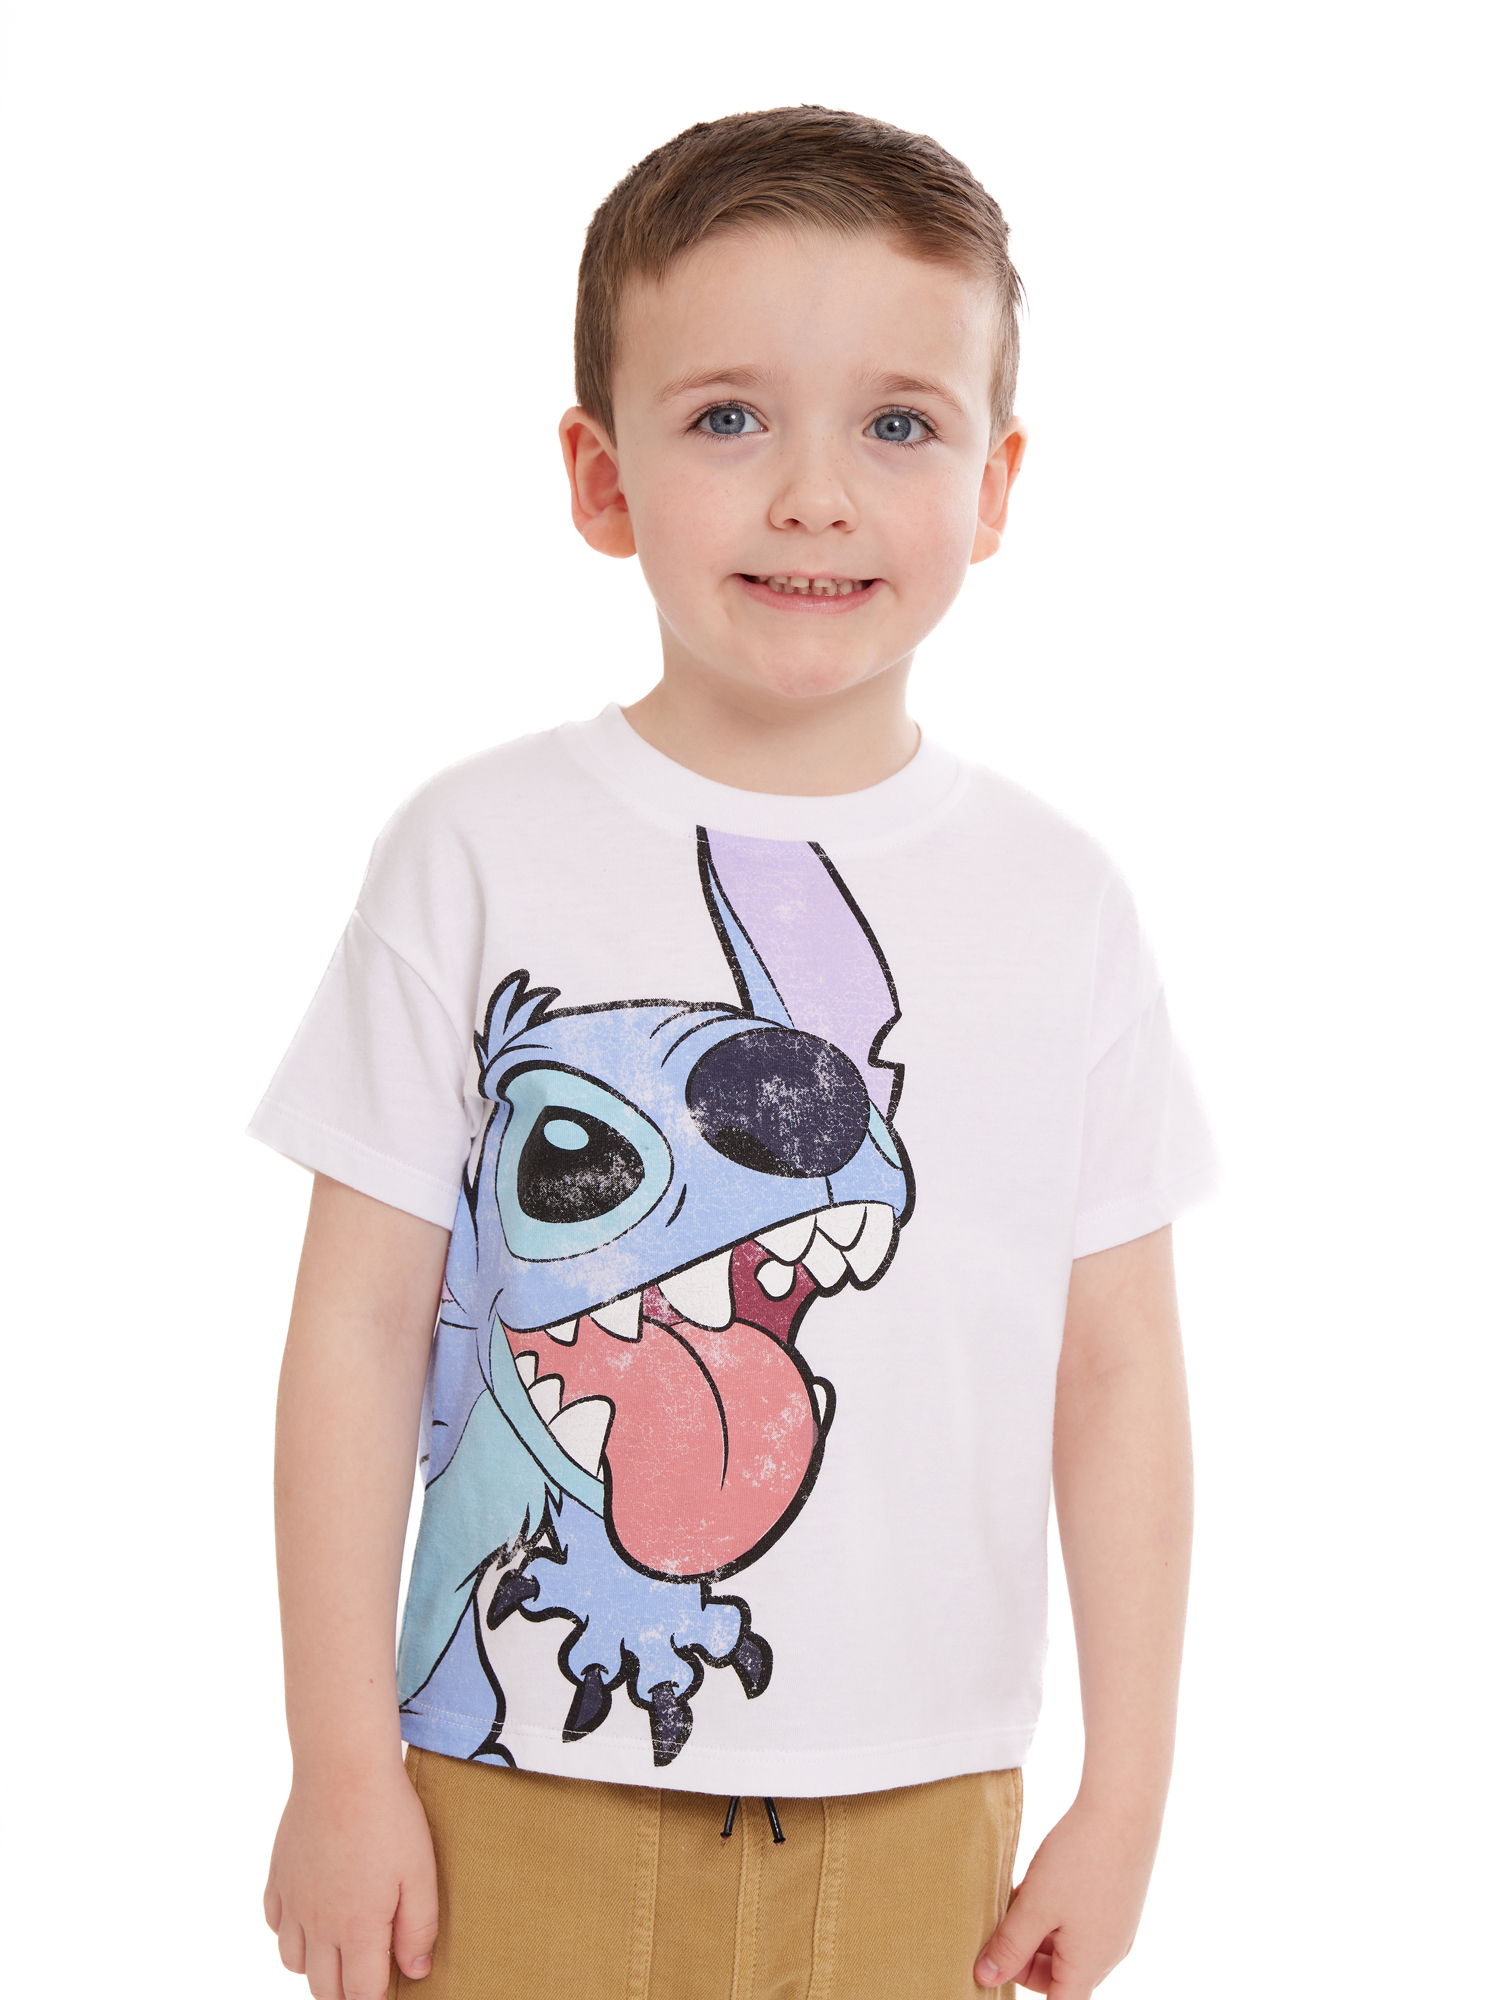 Stitch Toddler Boy Graphic Tees, 2-Pack, Sizes 2T-5T - image 4 of 8